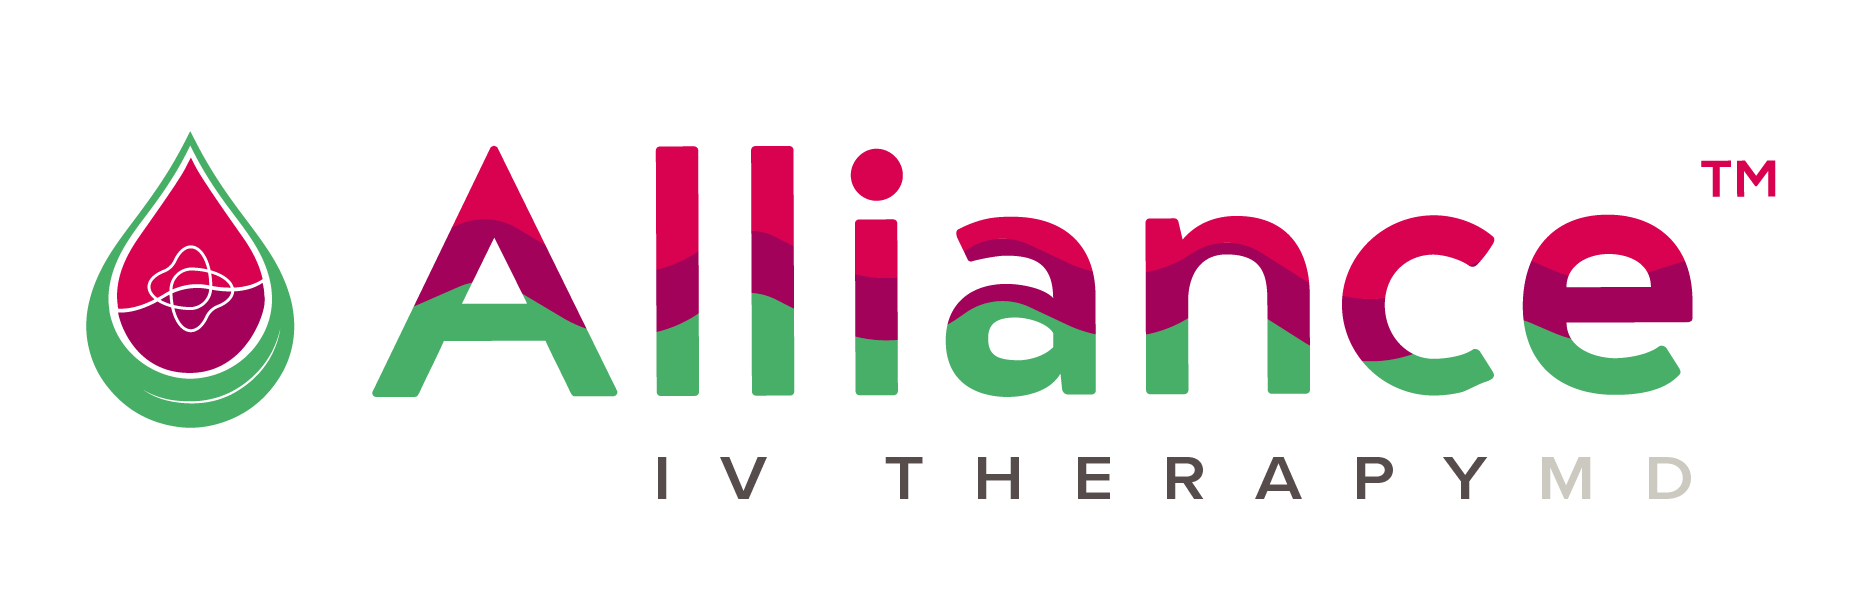 Alliance IV Therapy MD